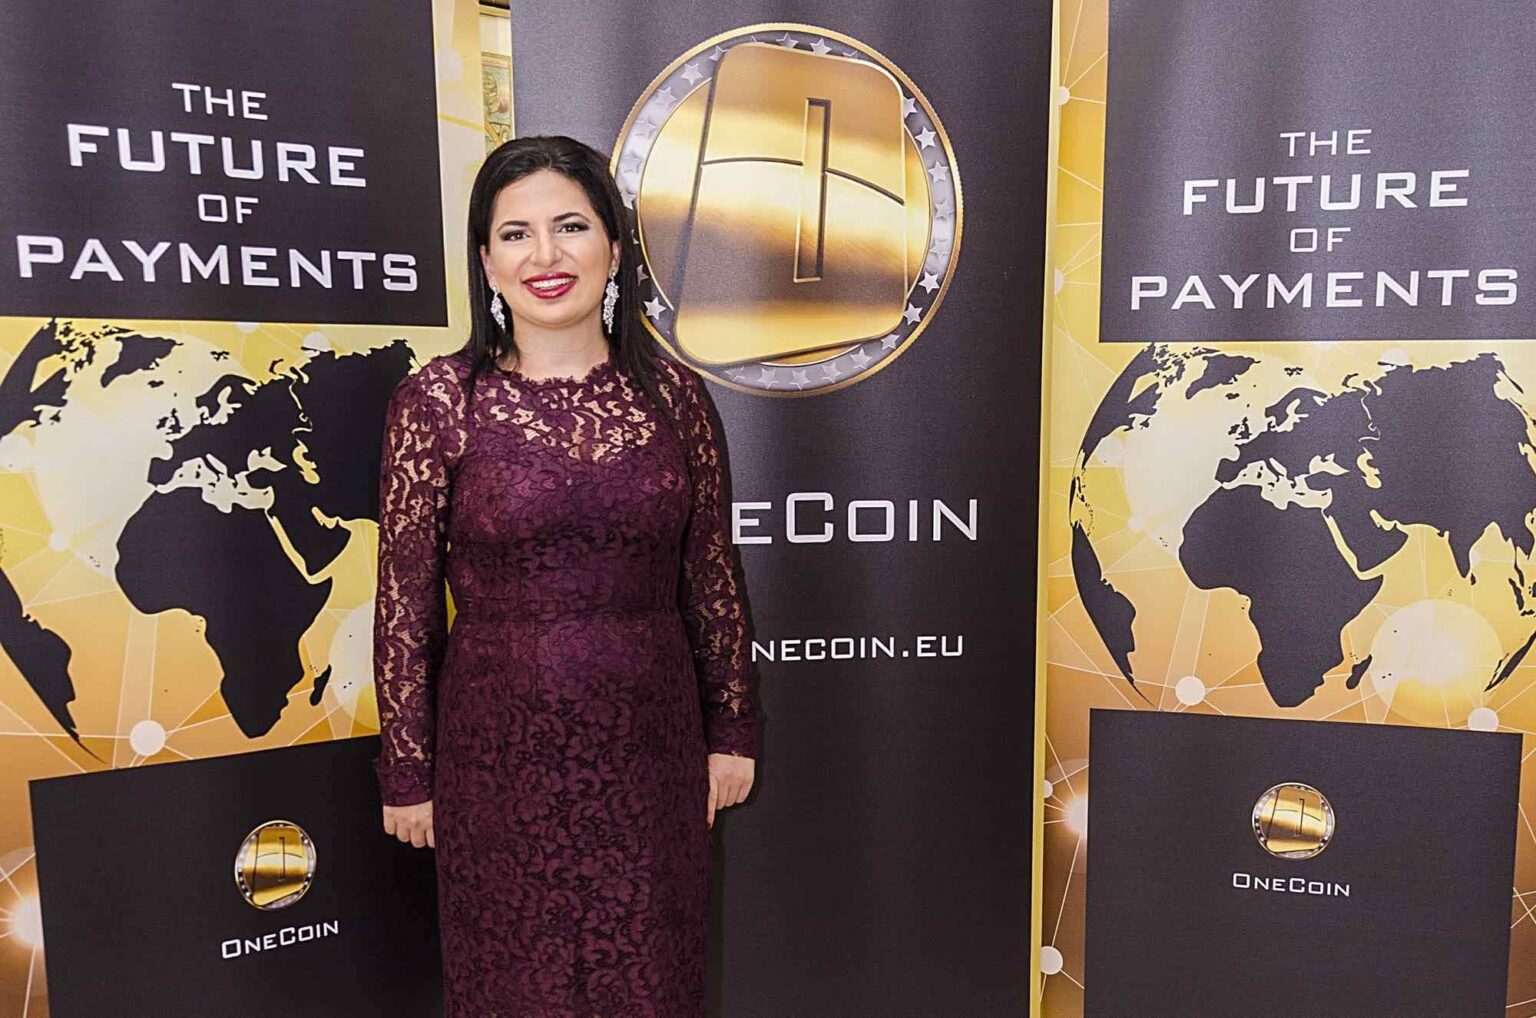 The Cryptocurrency market may be utterly confusing, but one thing is clear: OneCoin was a scam. What happened to the CEO? Let's find out.